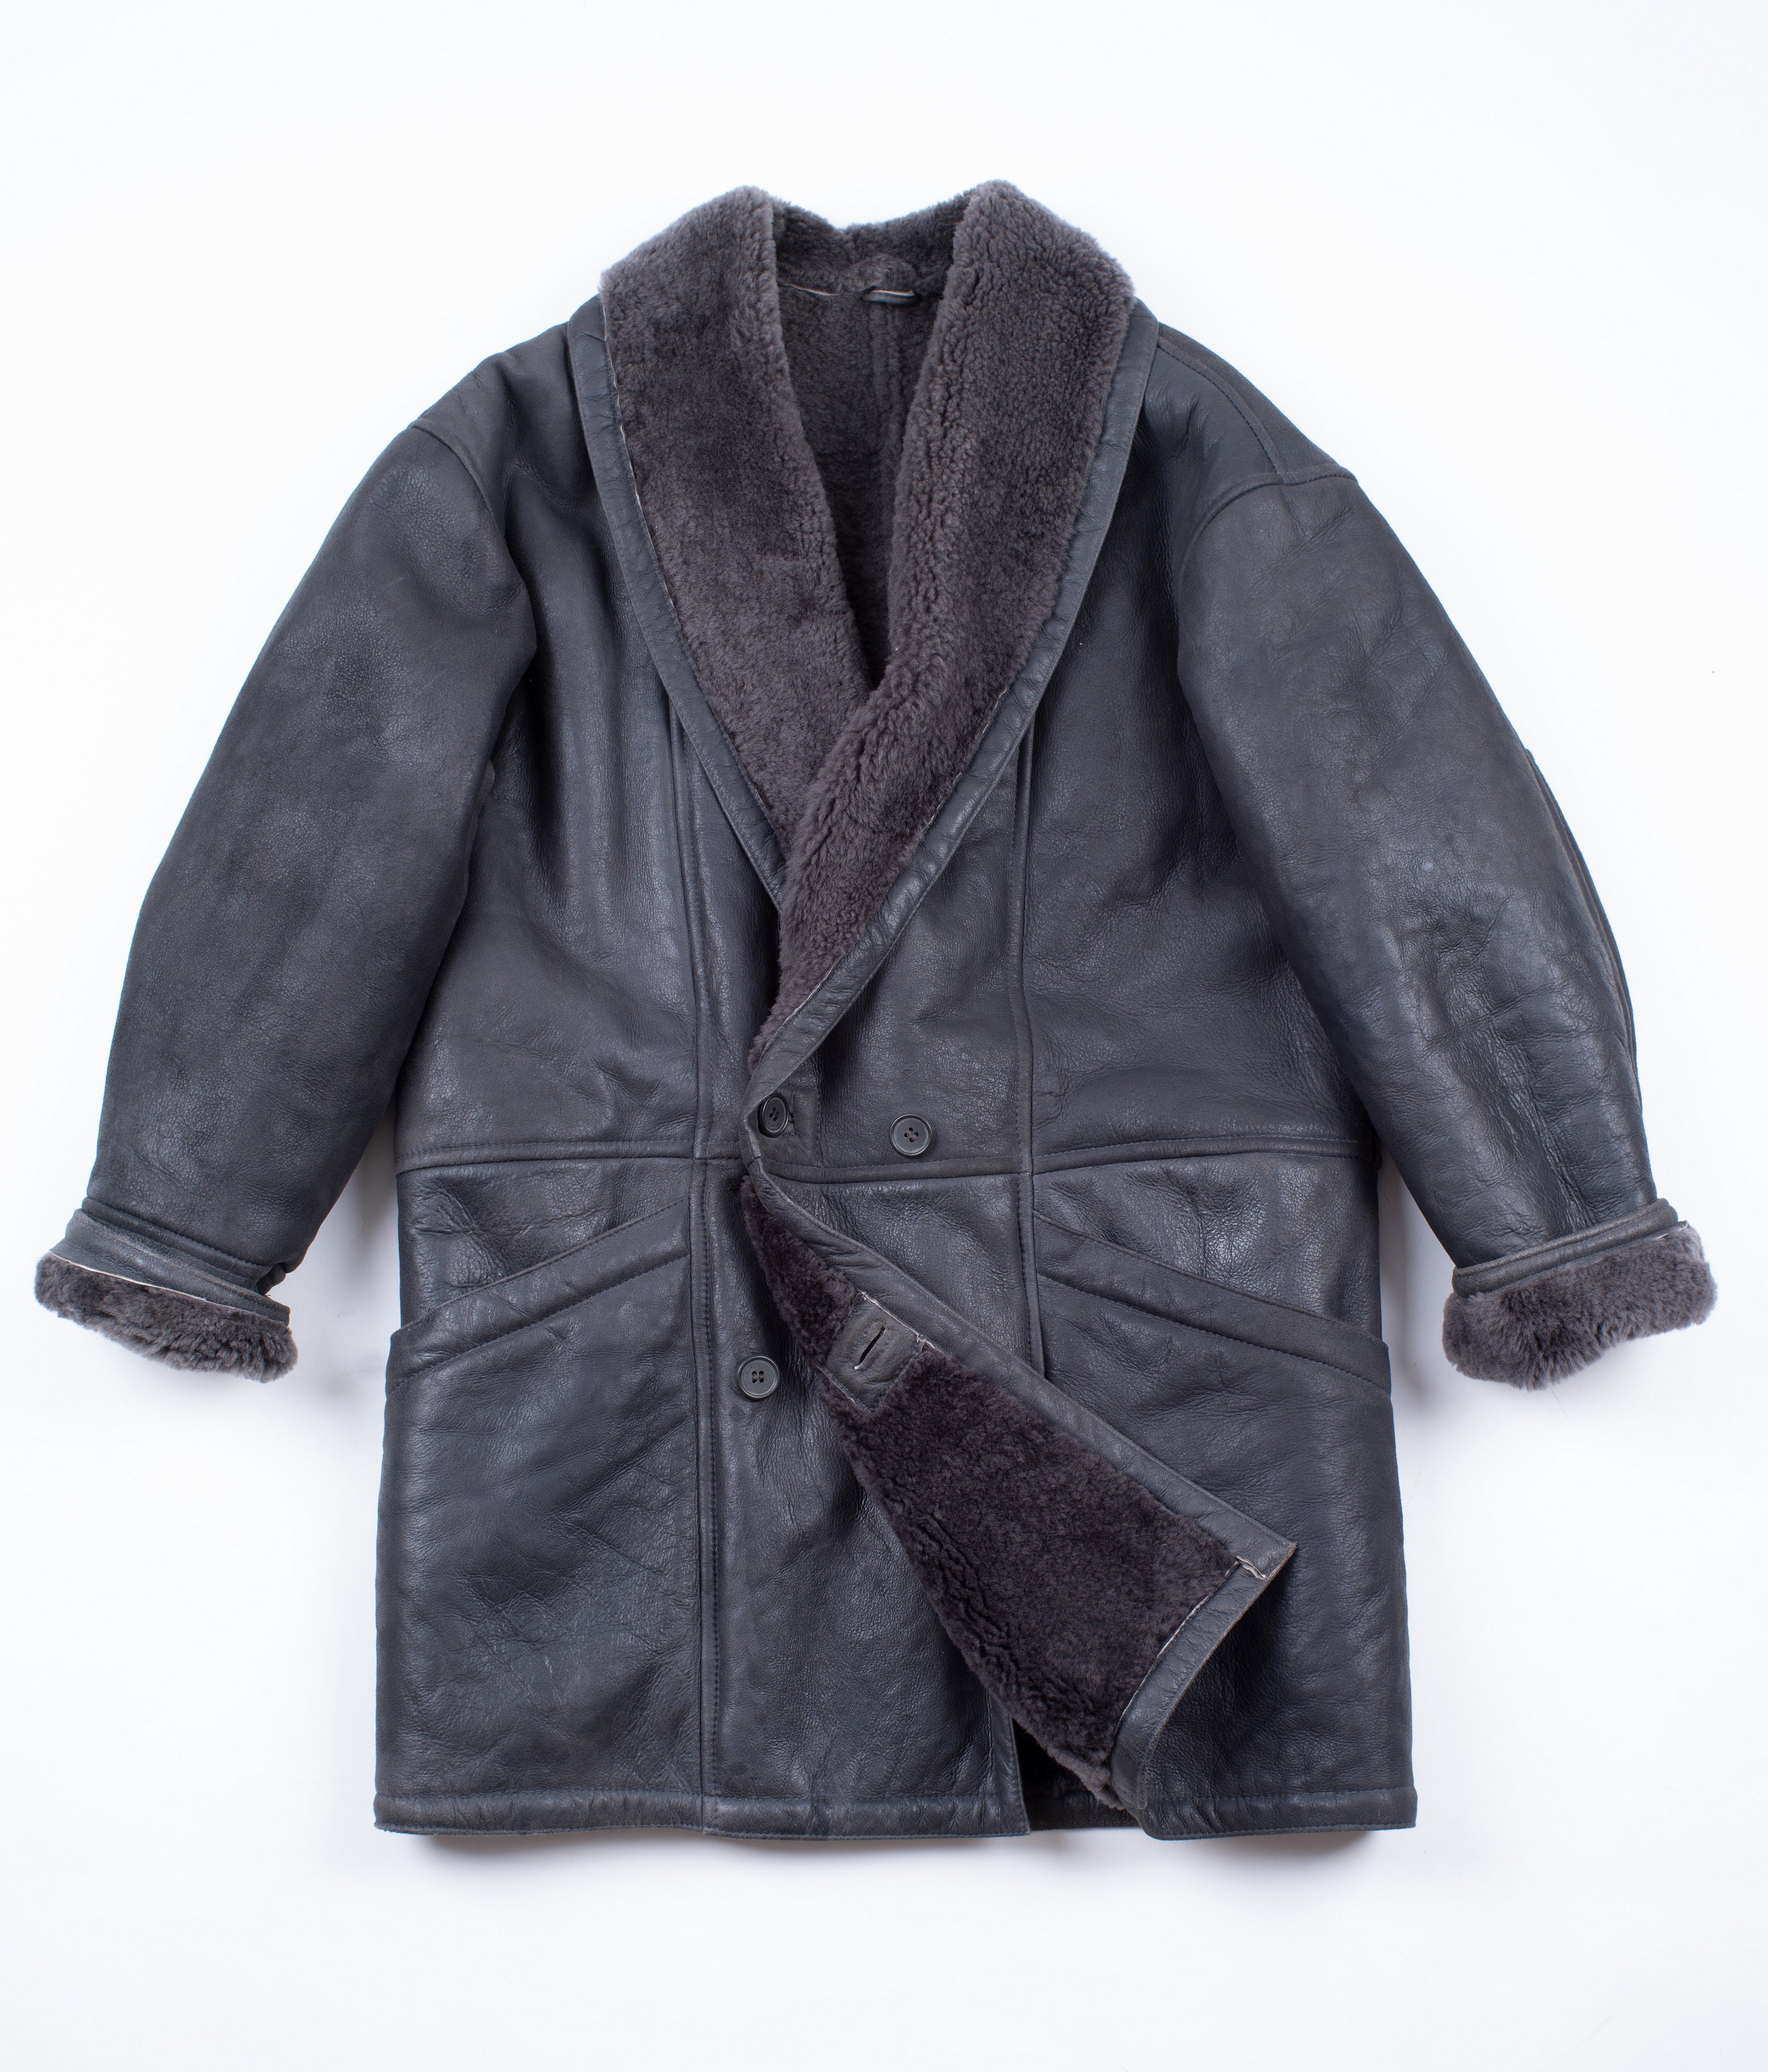 Gray Shawl Collar Shearling Leather Coat, SIZE US 40